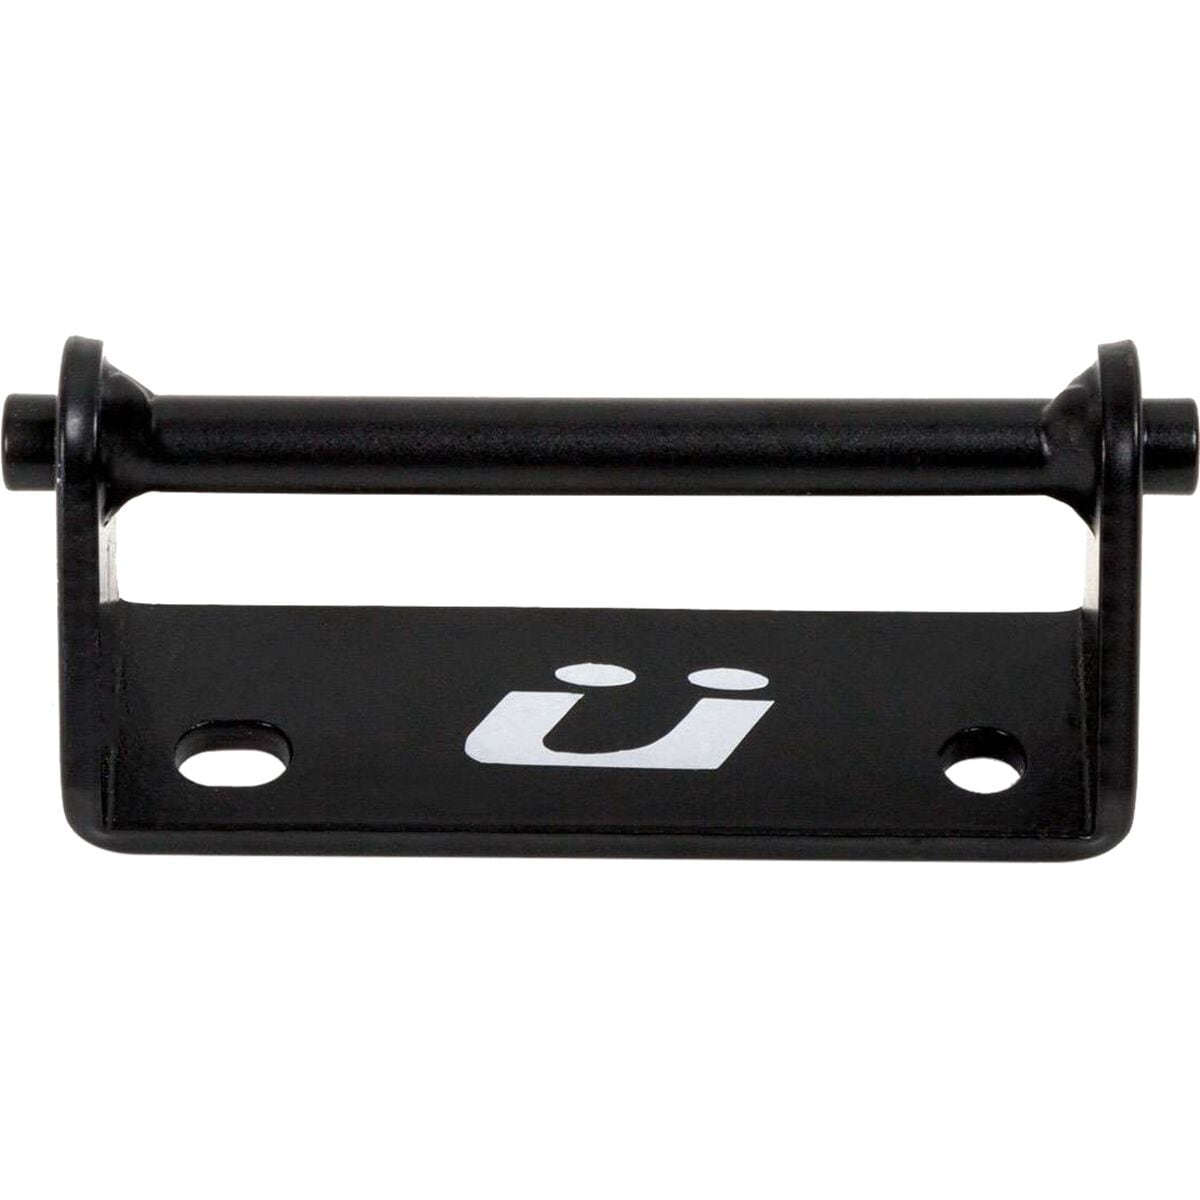 Kuat Dirtbag Truck Bed Mount 9x100, One Size